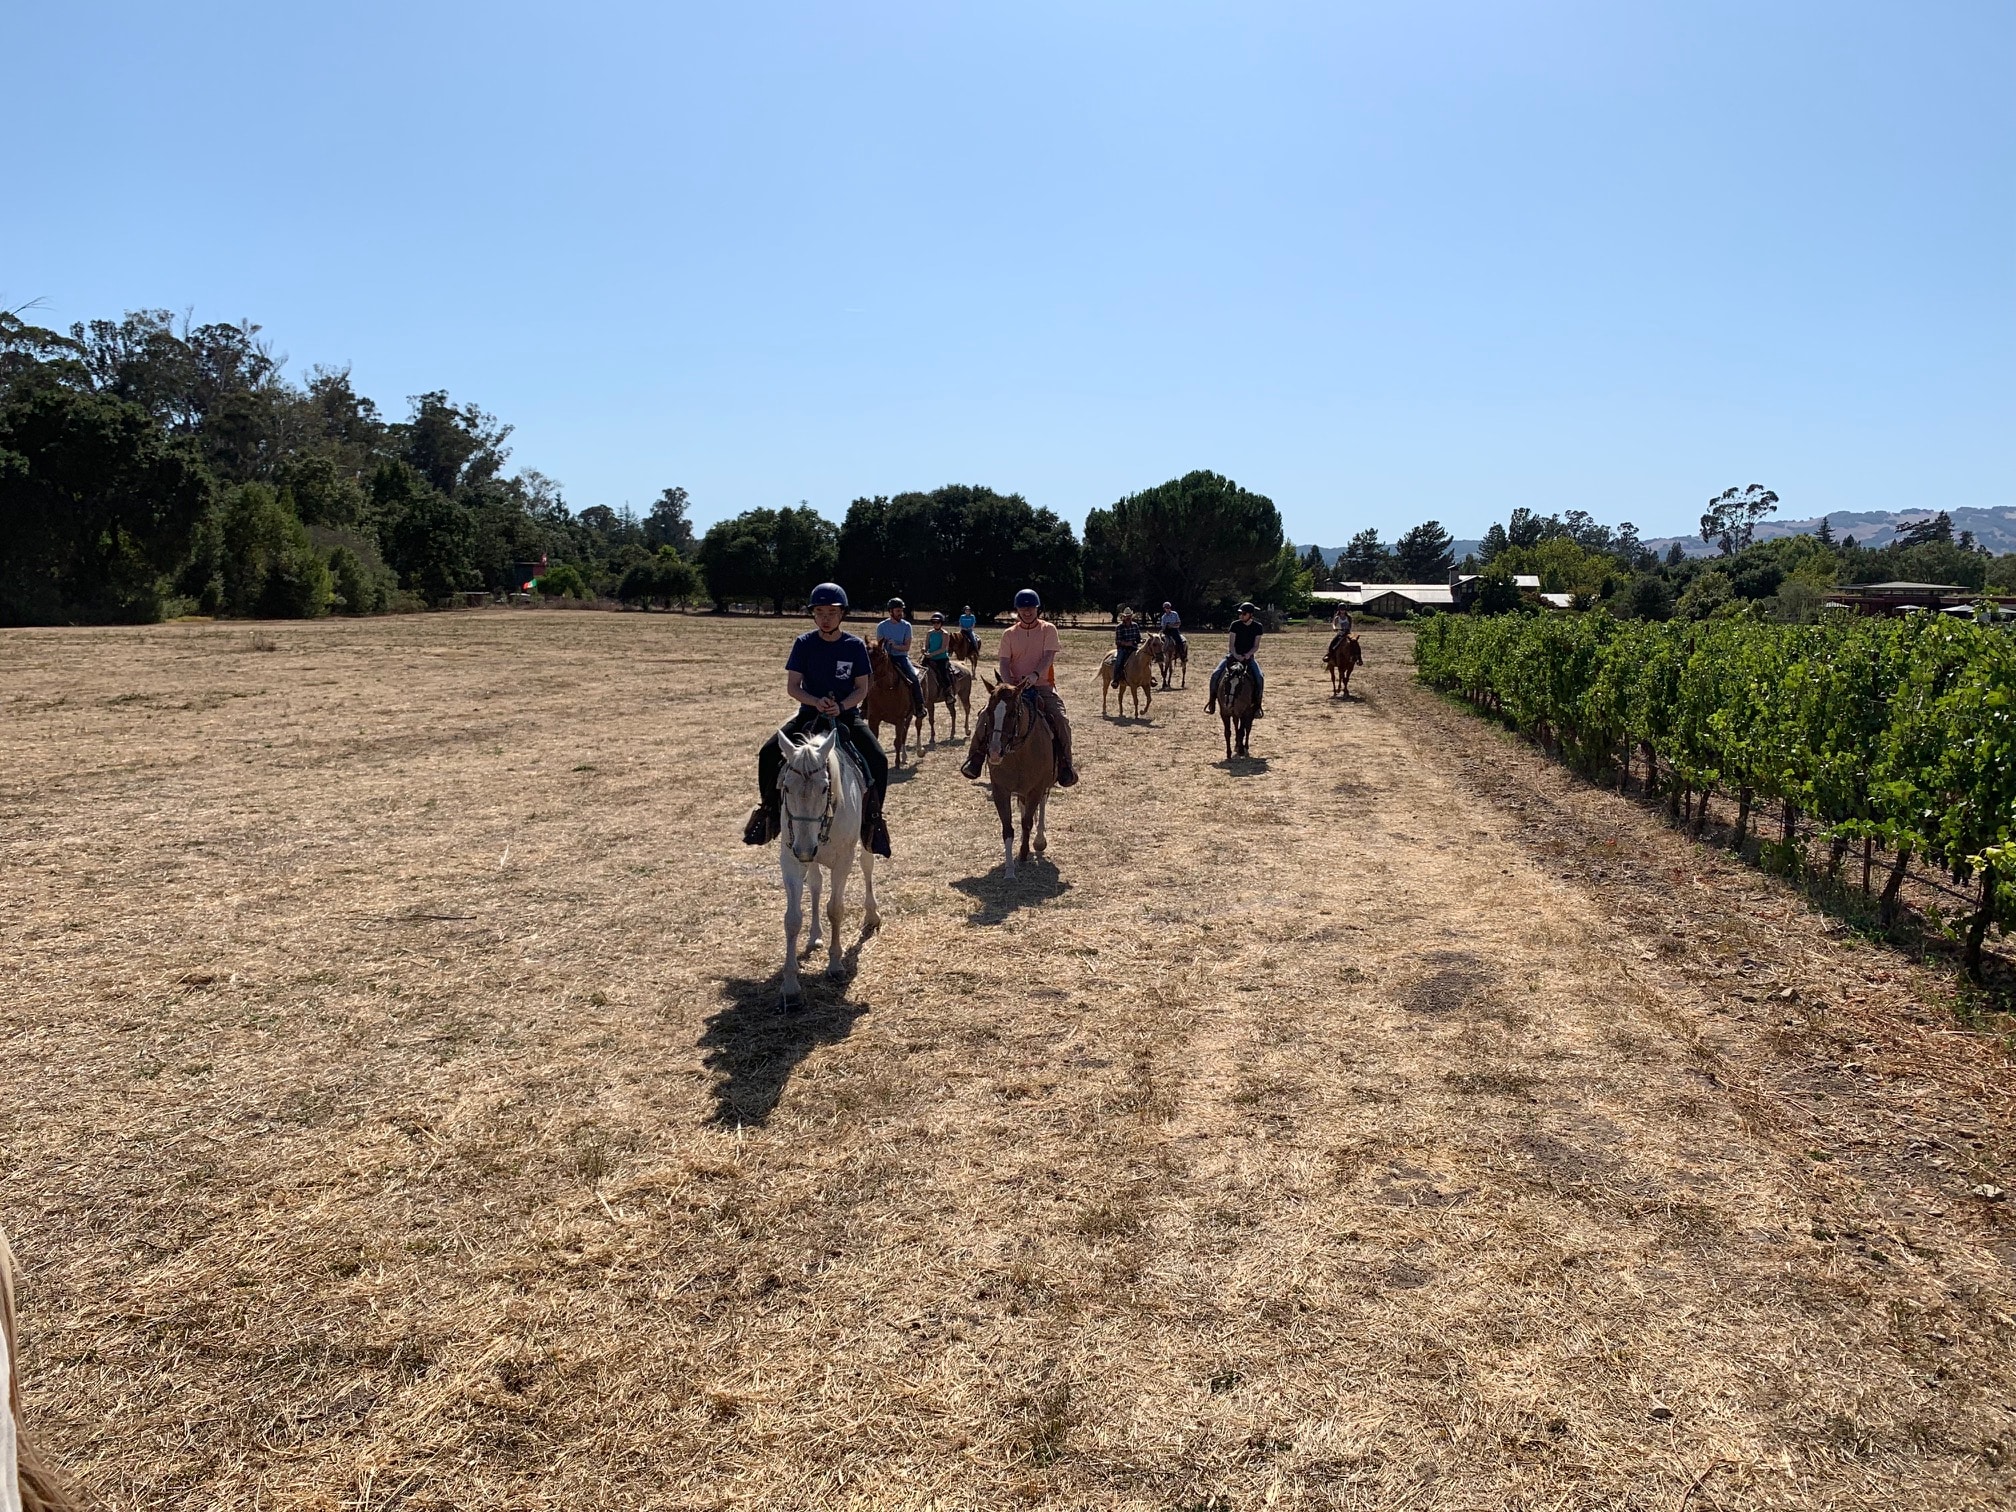 The horseback riding group goes for a ride and tour through the Bartholomew Estate Winery.